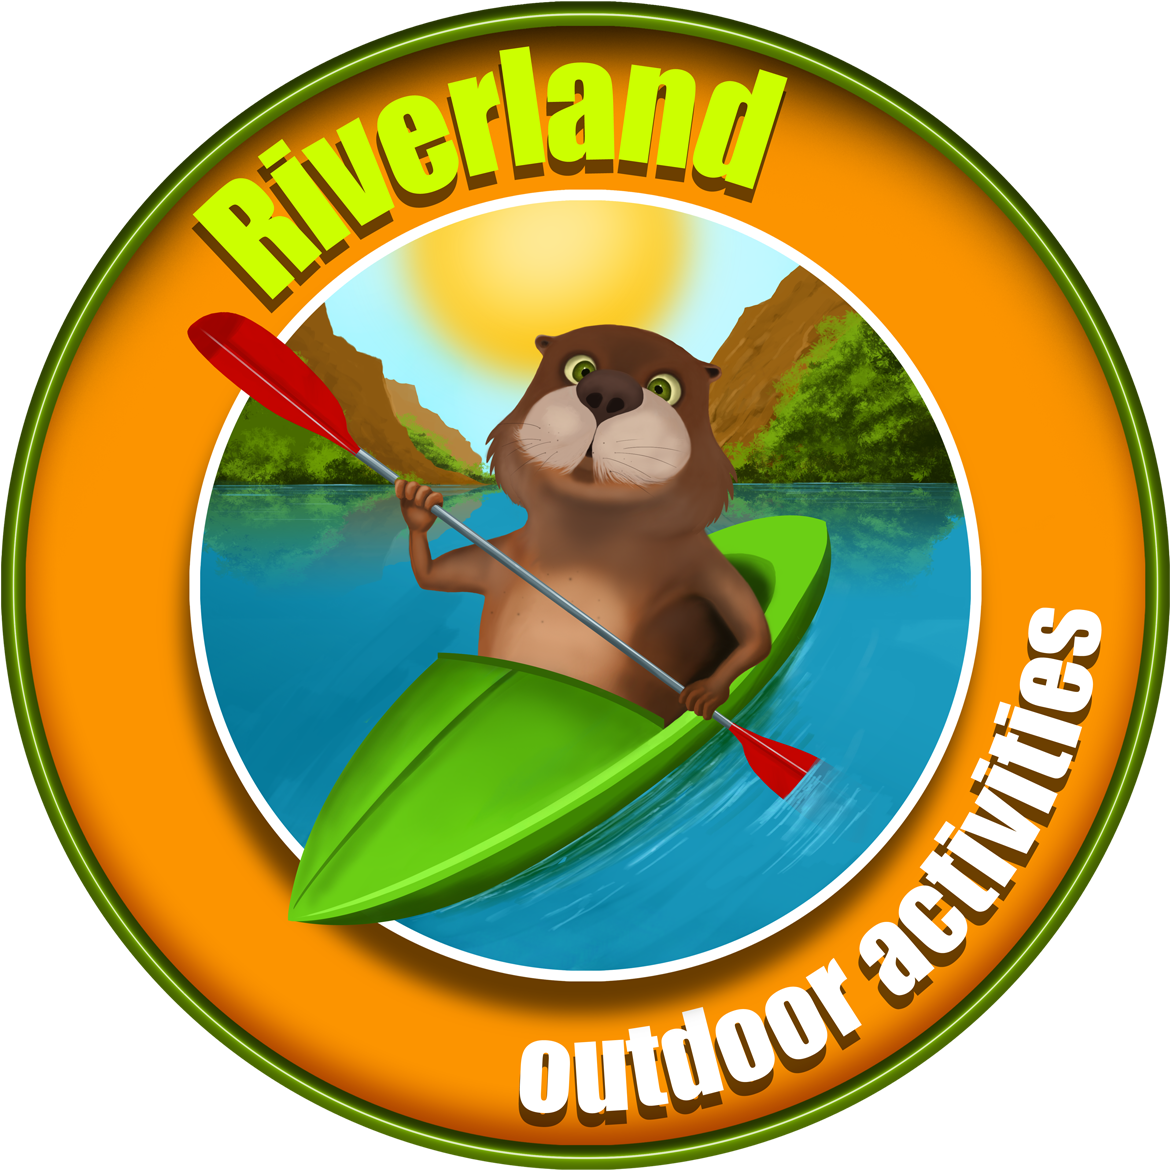 Riverland - Surface Water Sports (1199x1202)